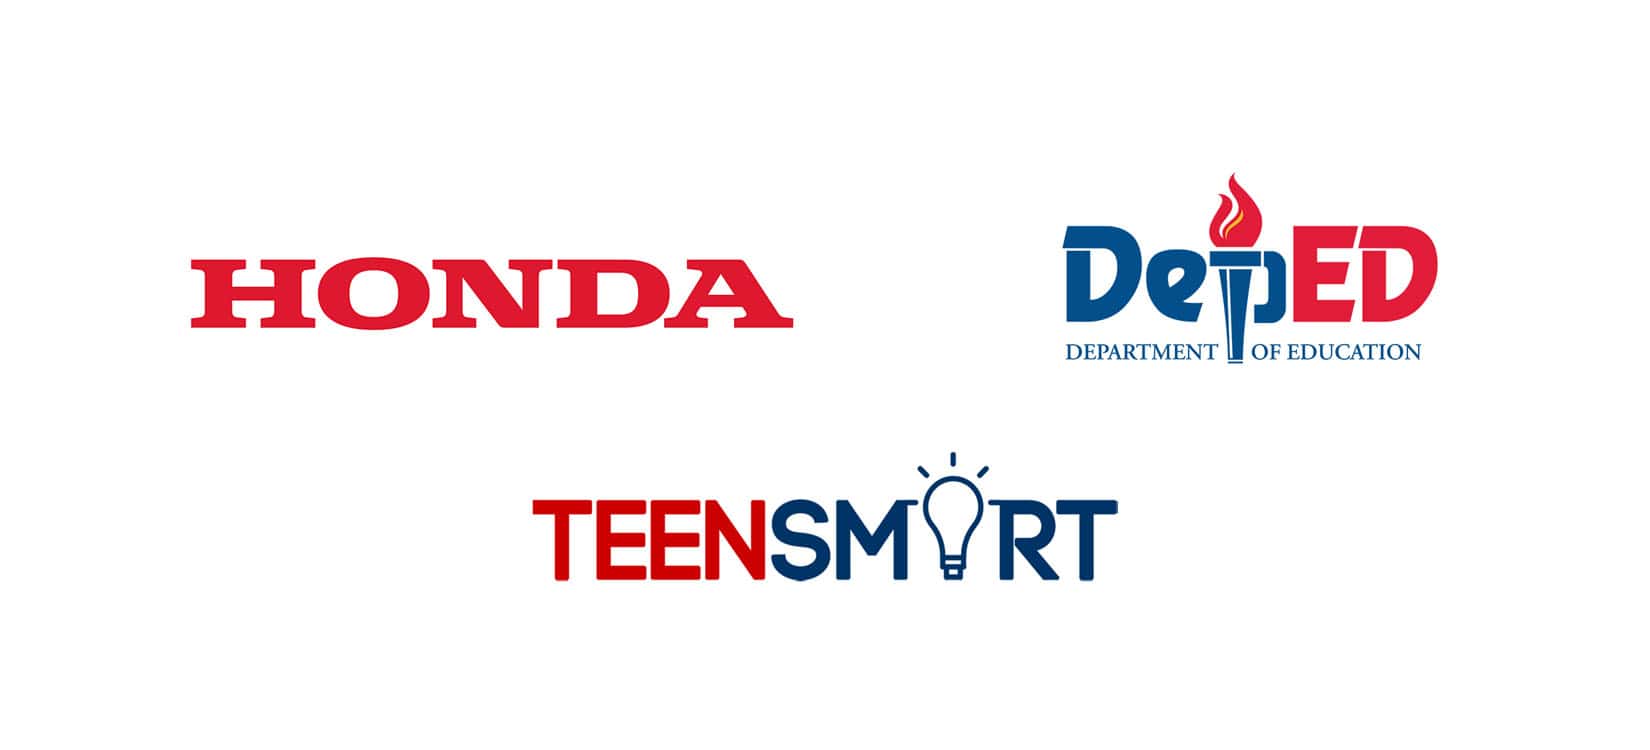 Honda continues its road safety advocacy through “Teen Smart” program